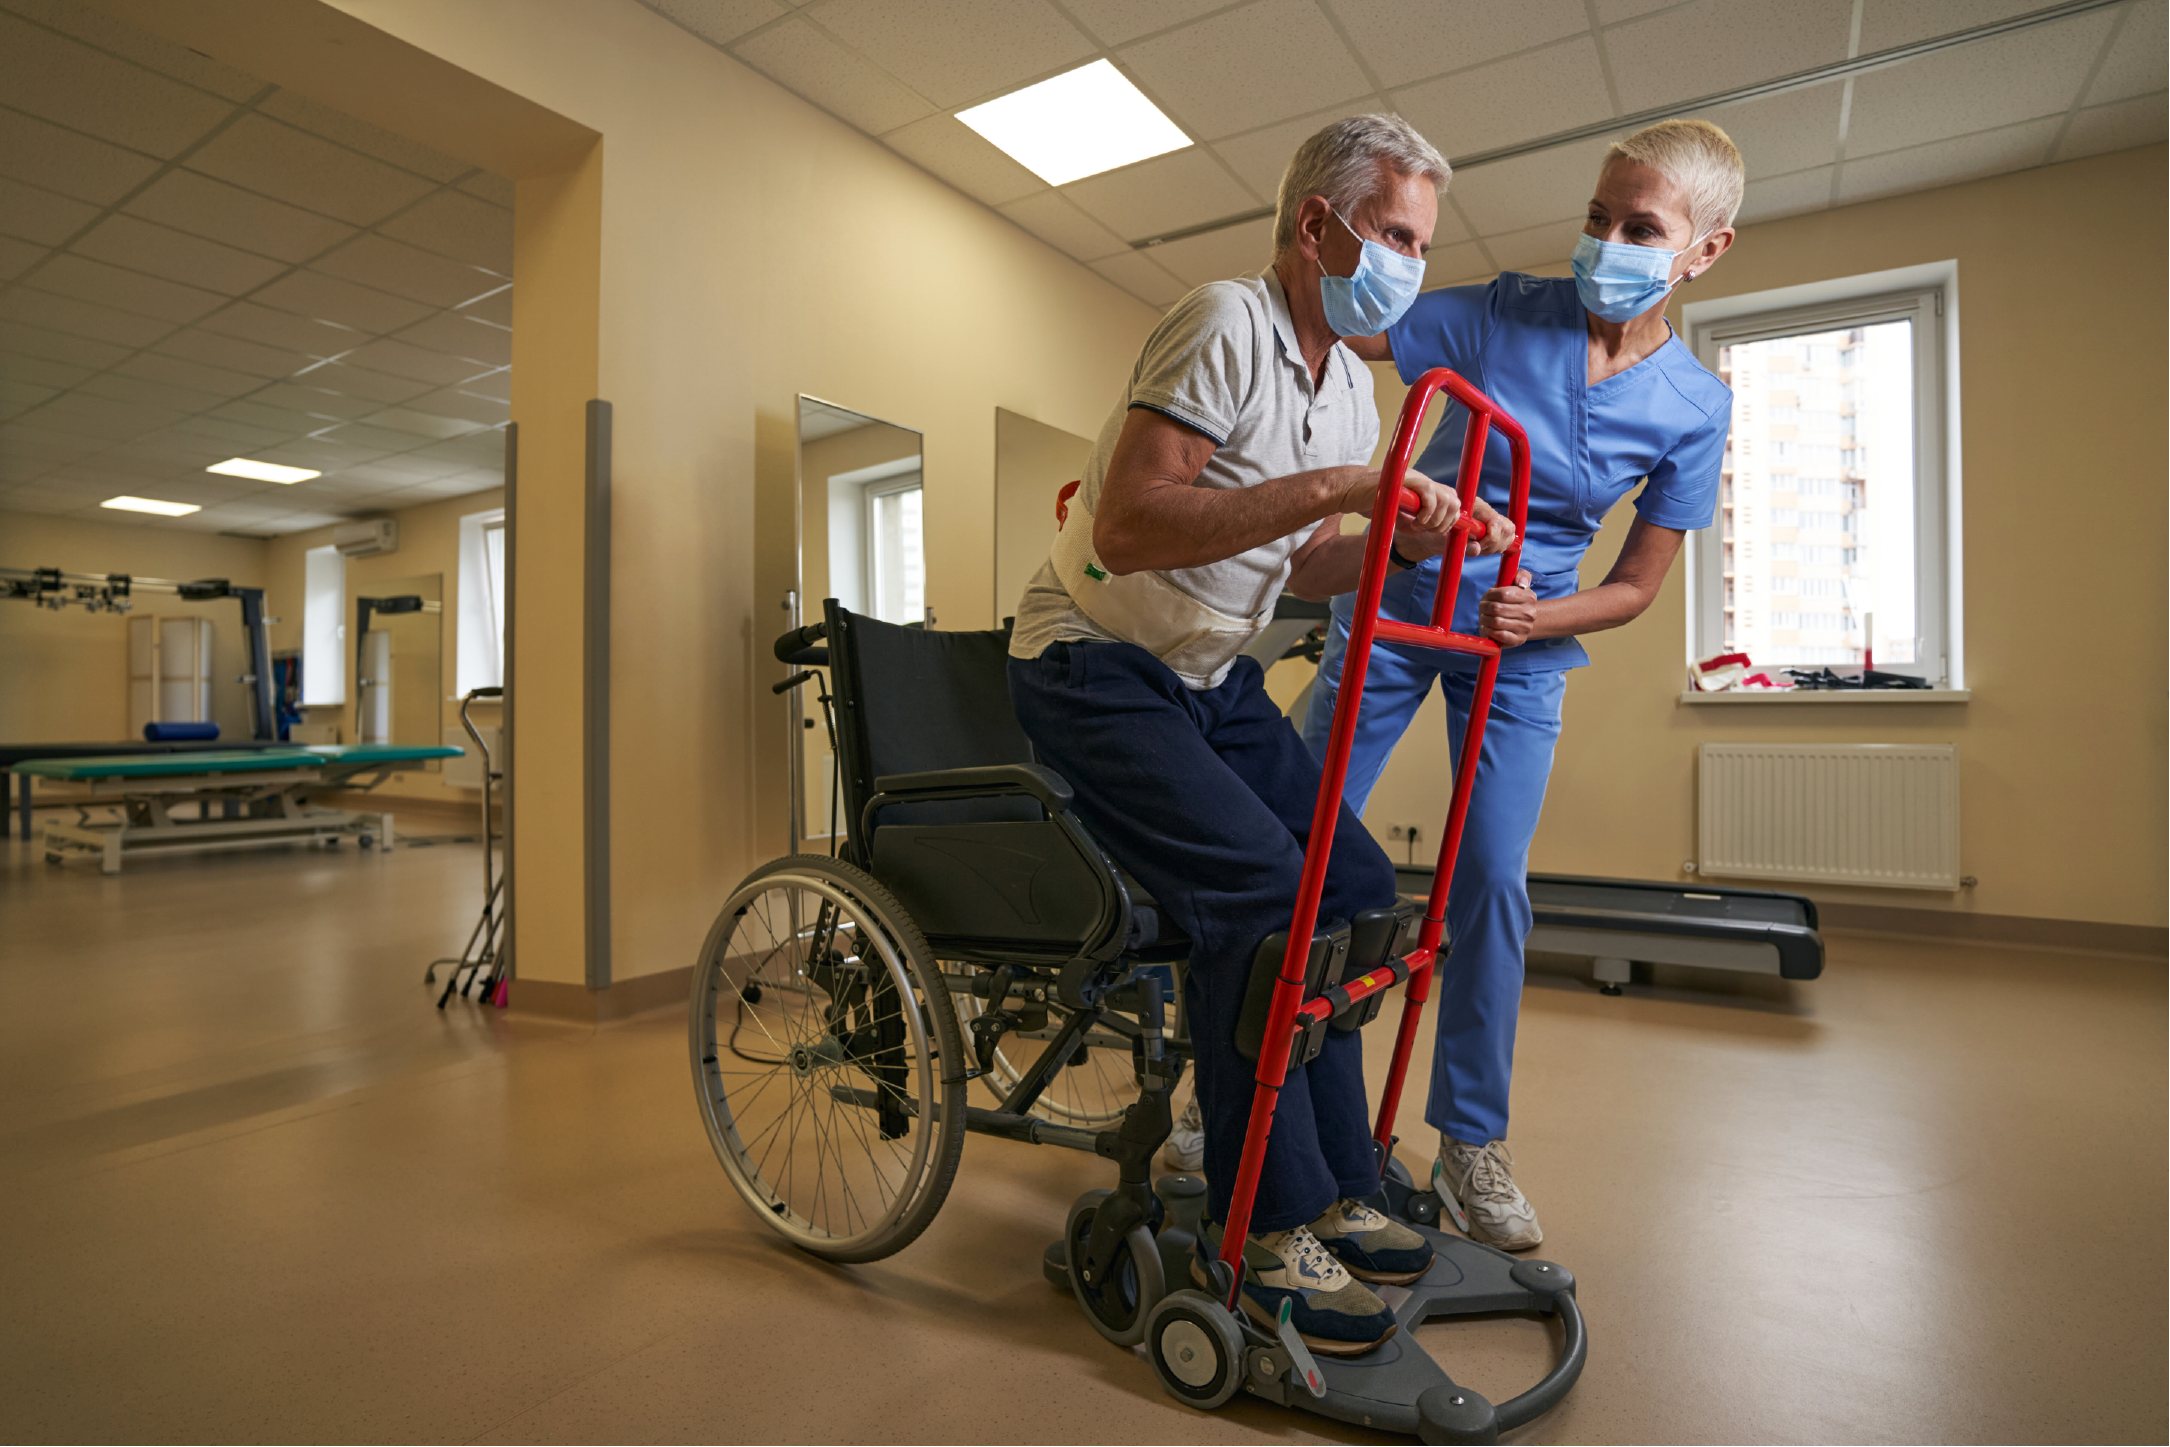 "A physical therapist helps a stroke patient in rehab center while both wear masks during covid"